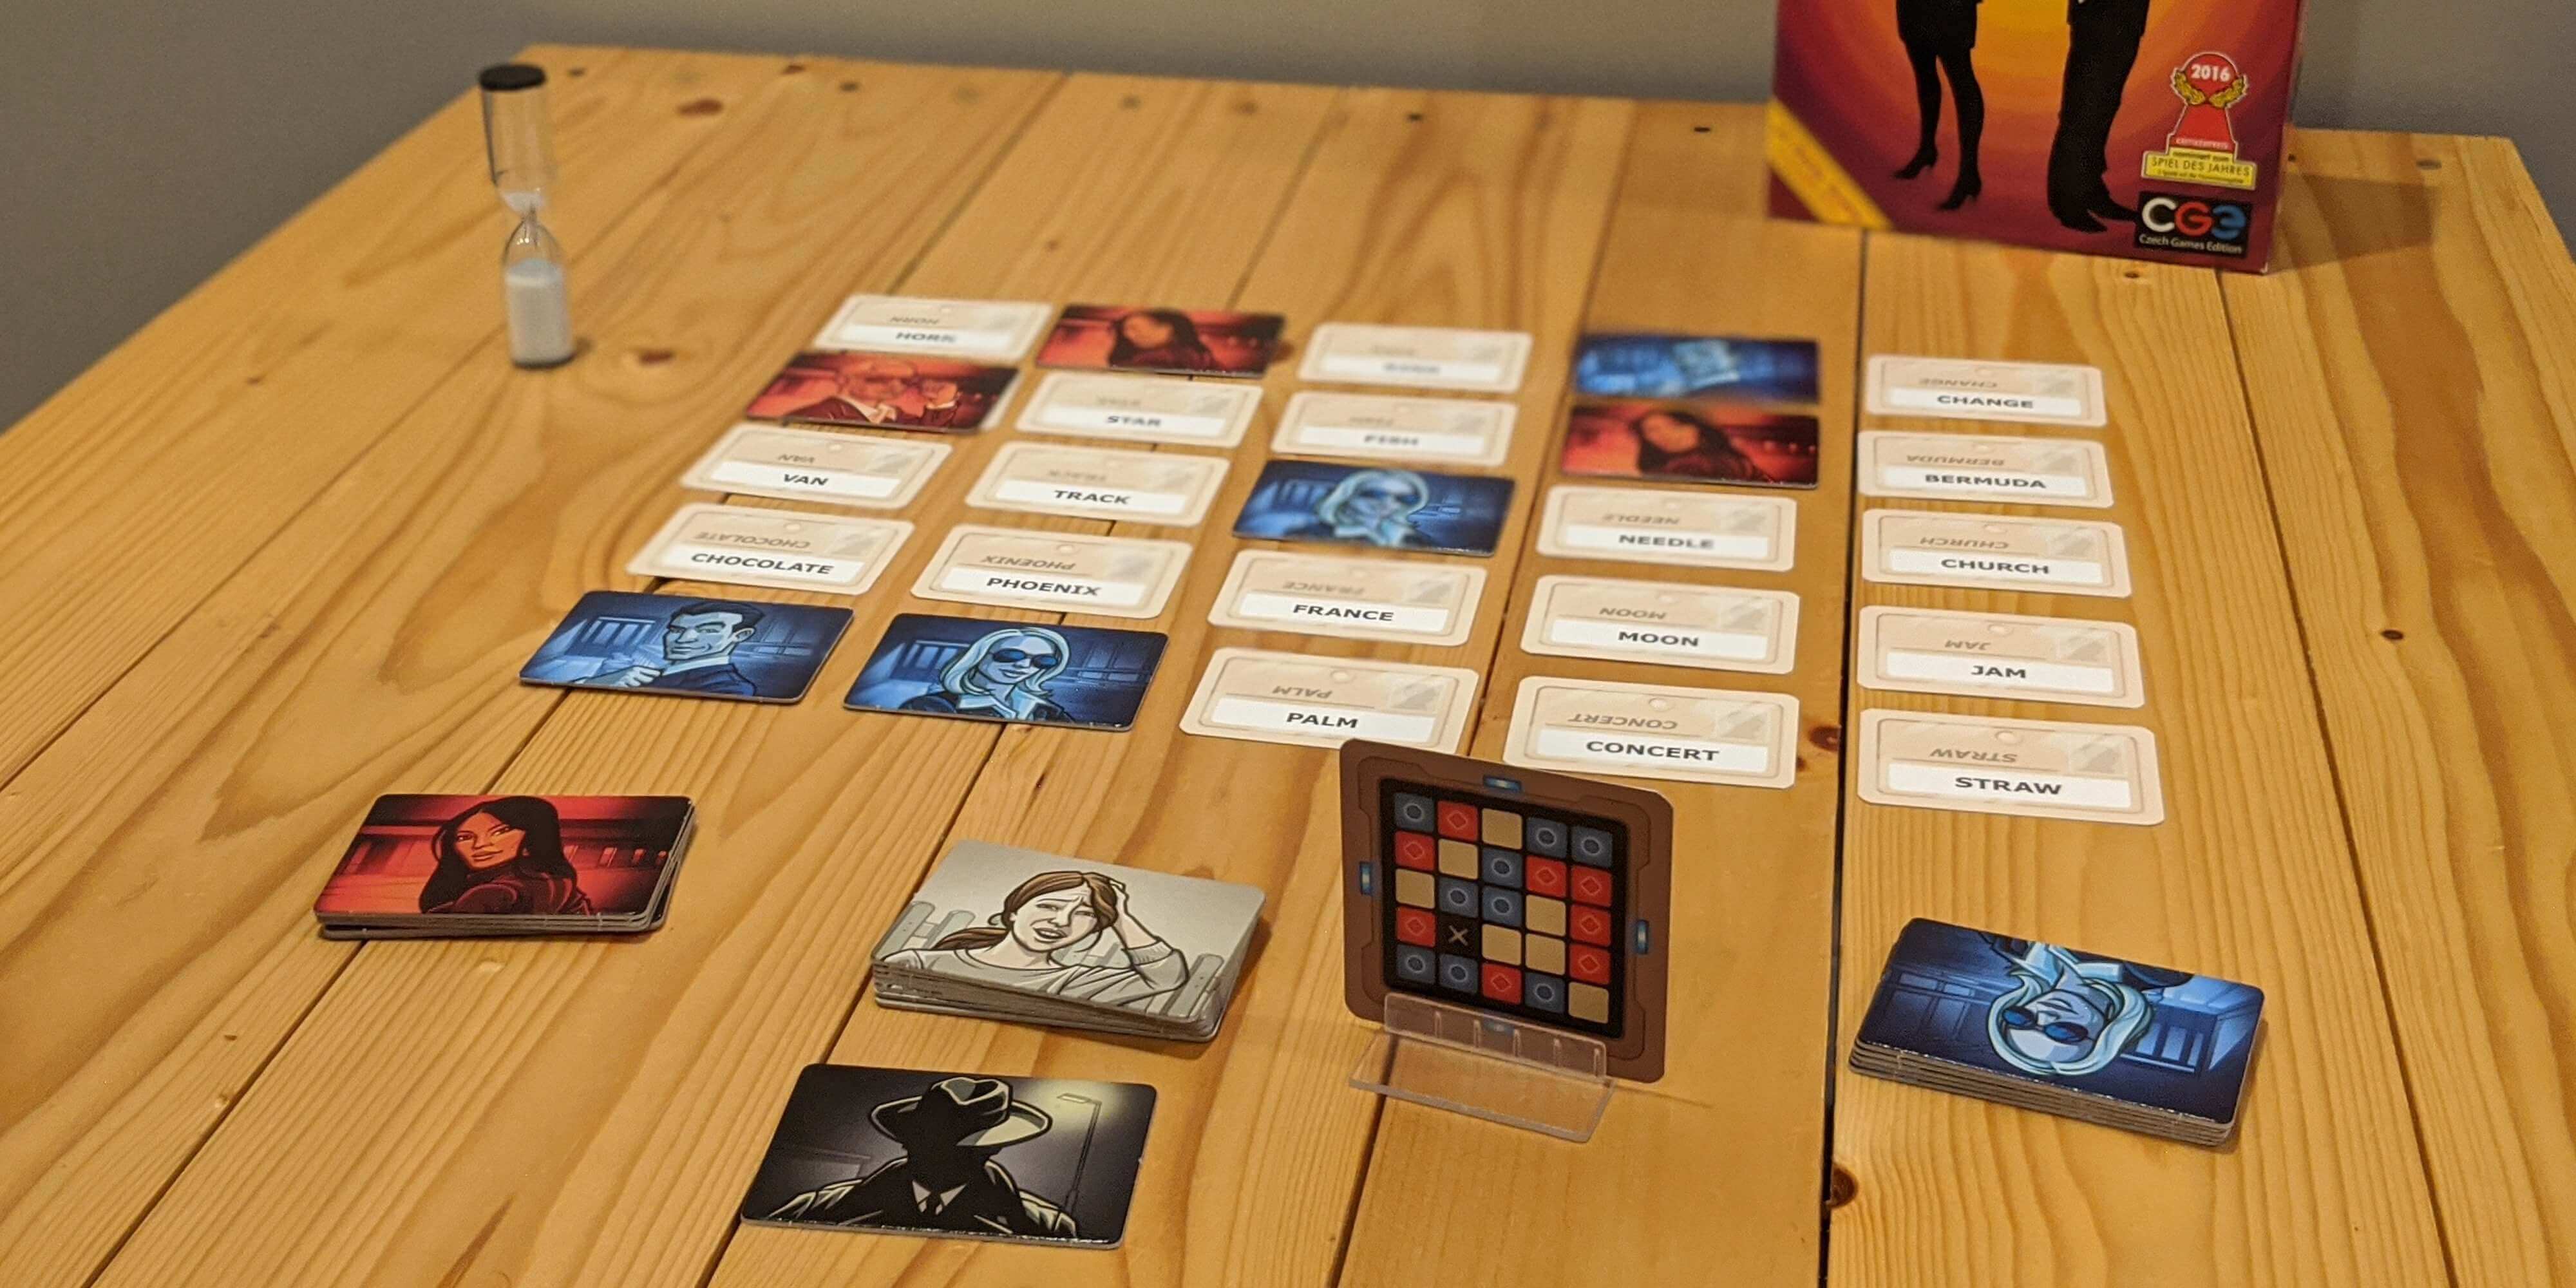 Codenames card game, co-operative word game of deception